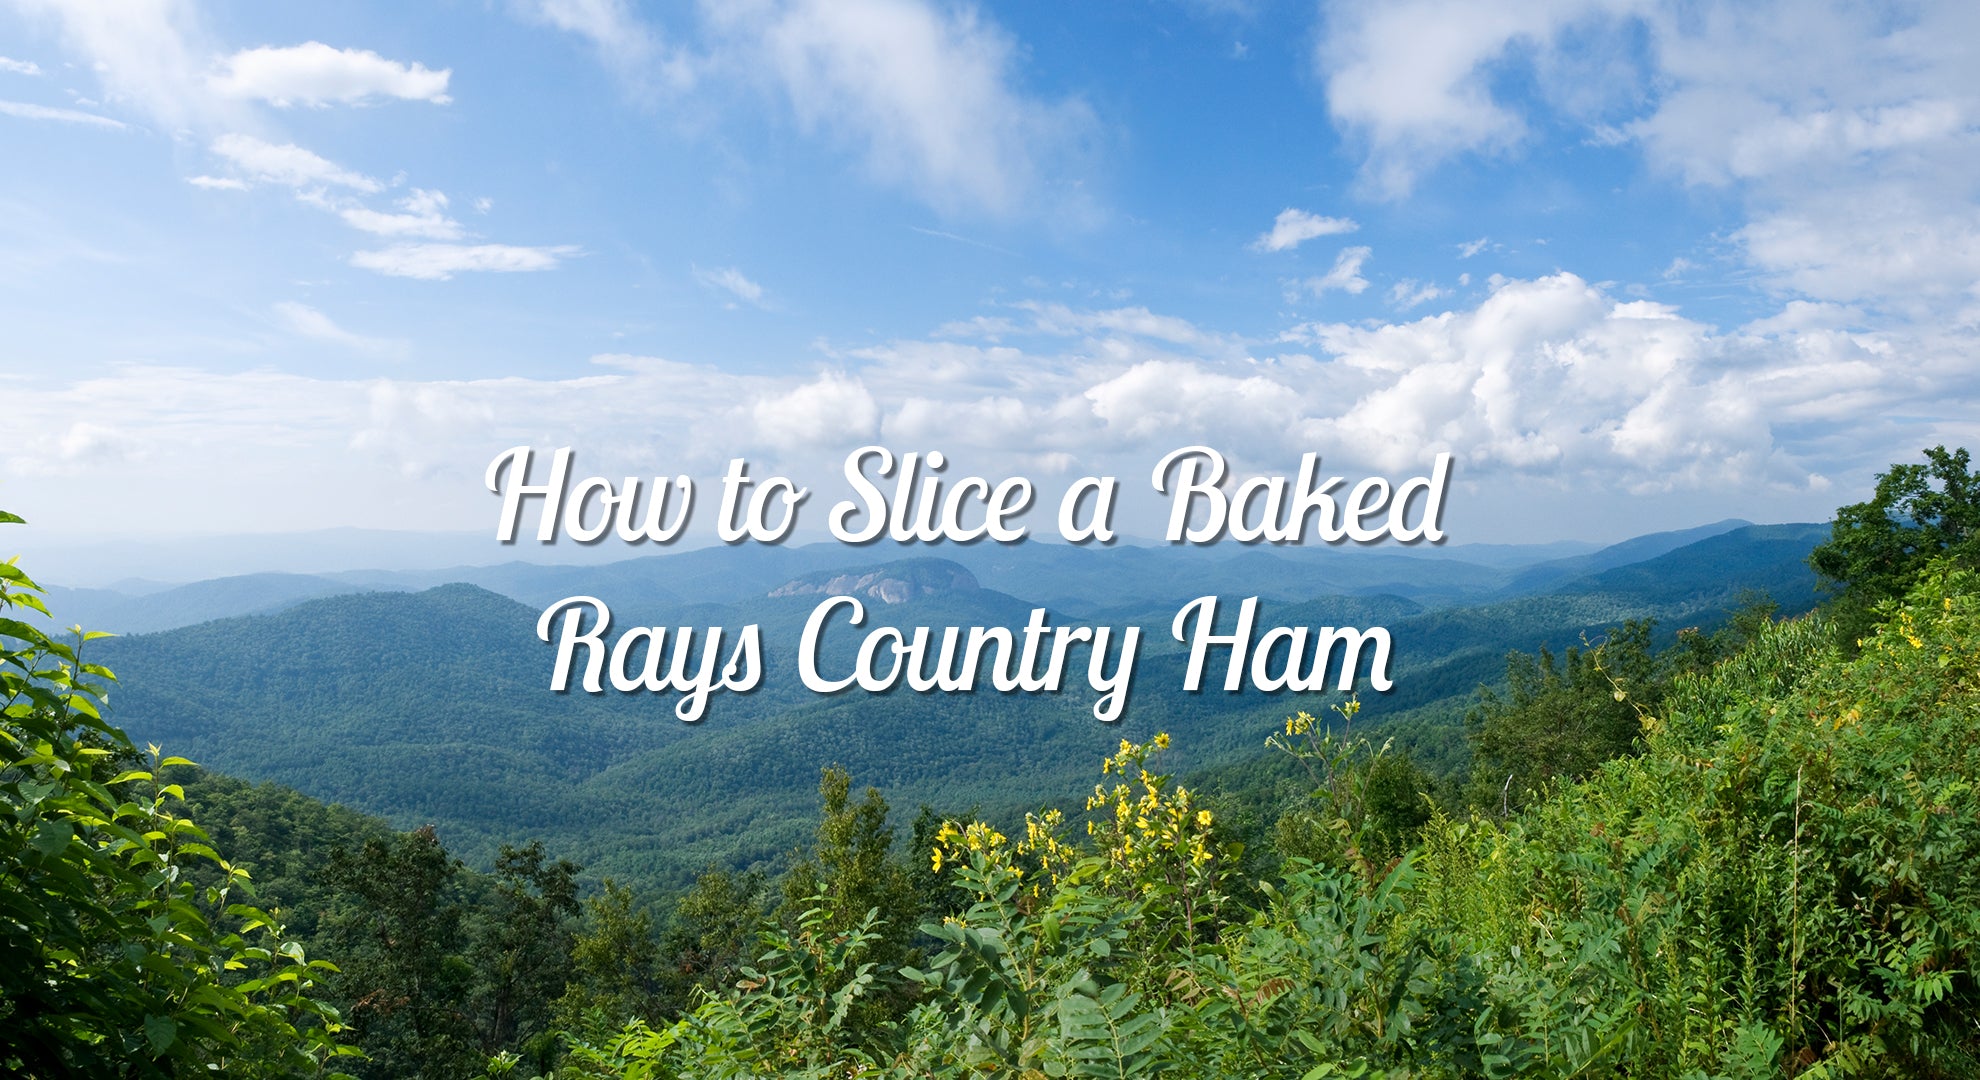 How to Slice a Baked Country Ham